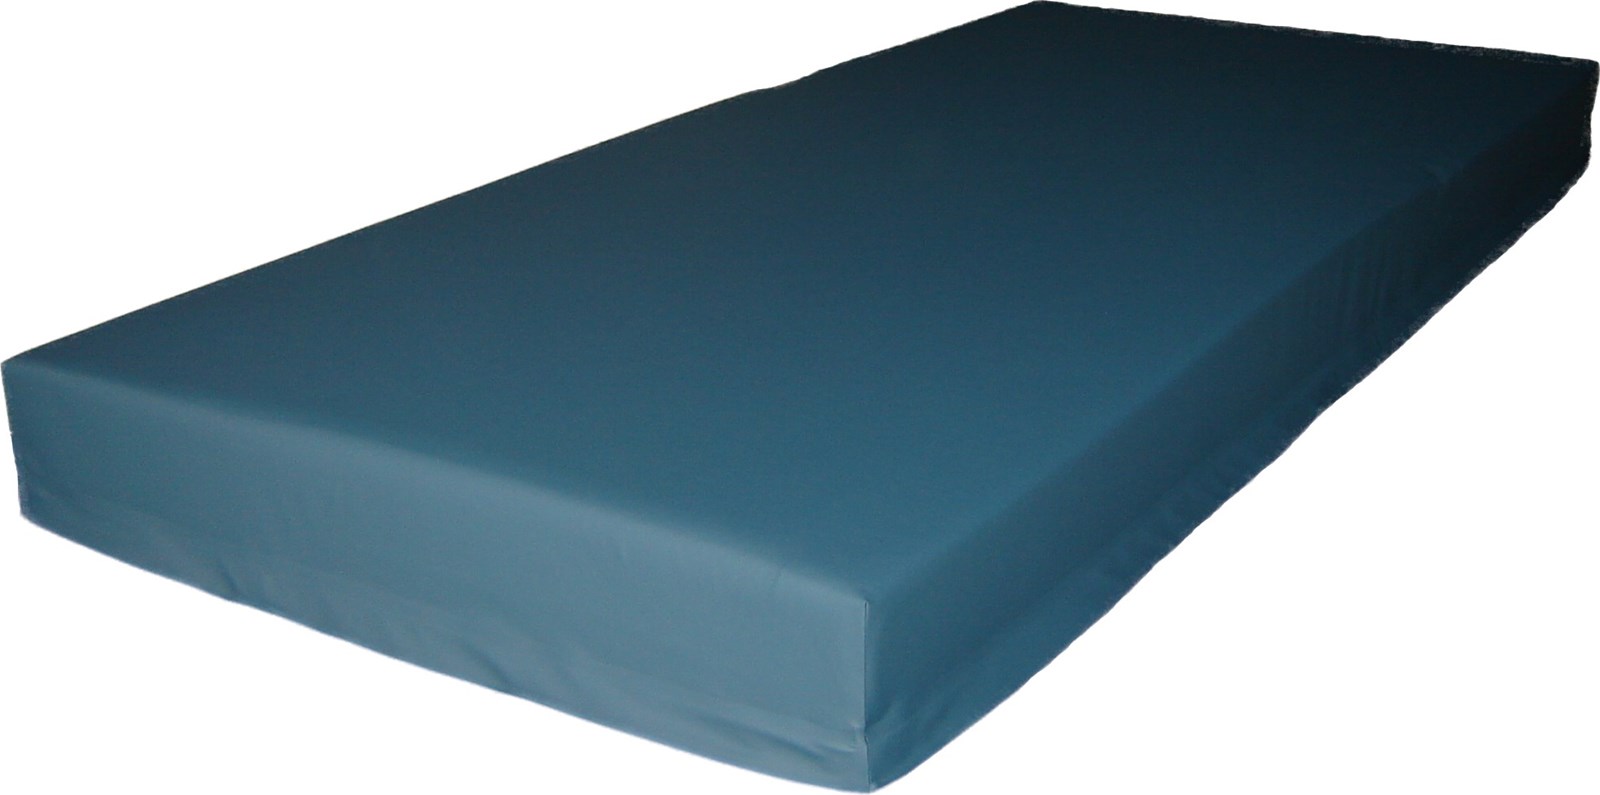 vinyl cover for twin mattress